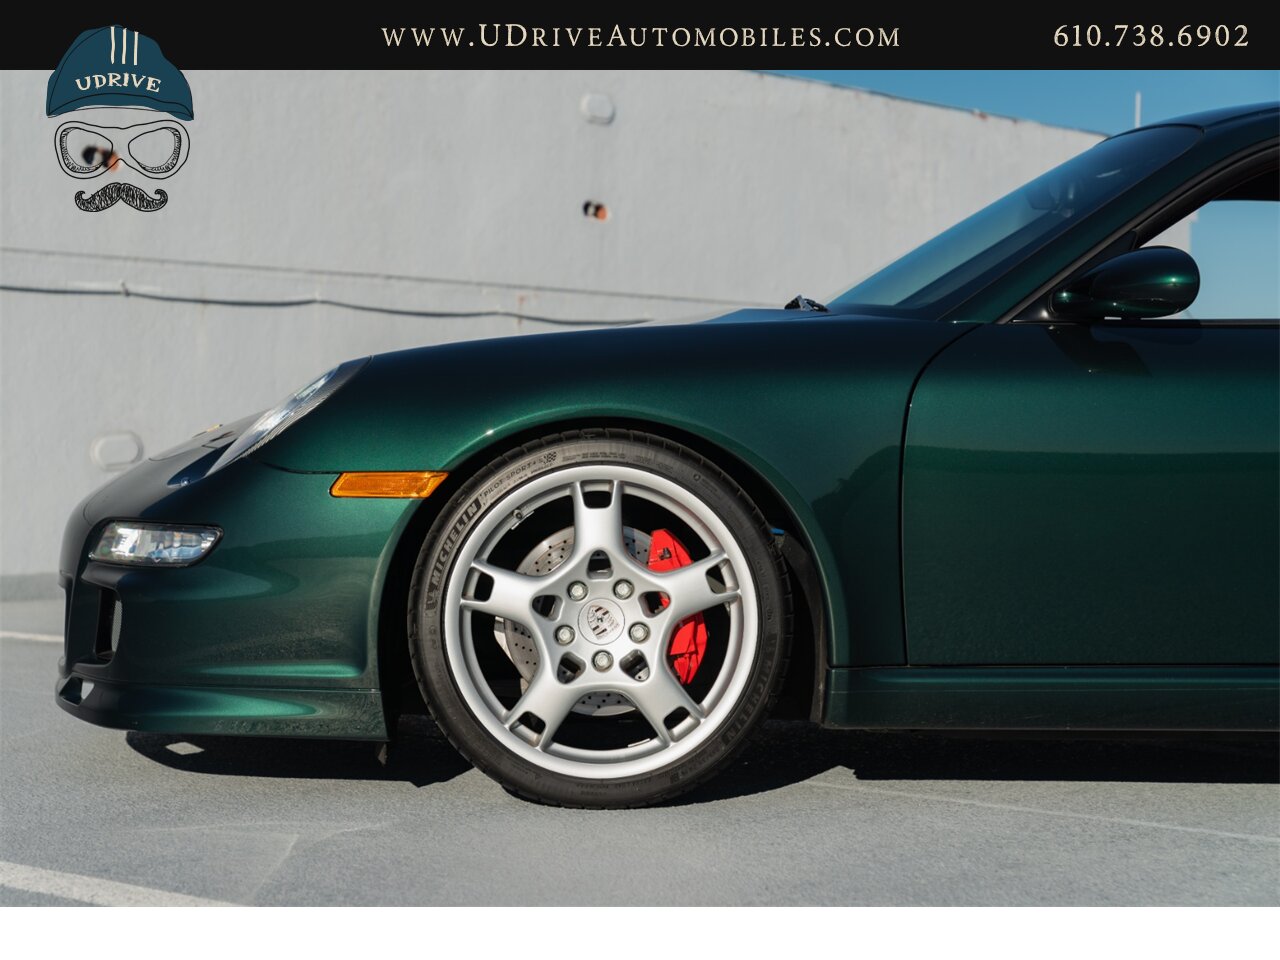 2007 Porsche 911 Carrera S 6Spd 997S RARE X51 Power Kit 381hp  1 of a Kind Forest Green over Blk/Terracotta Chrono Adap Sport Sts $113k MSRP - Photo 10 - West Chester, PA 19382